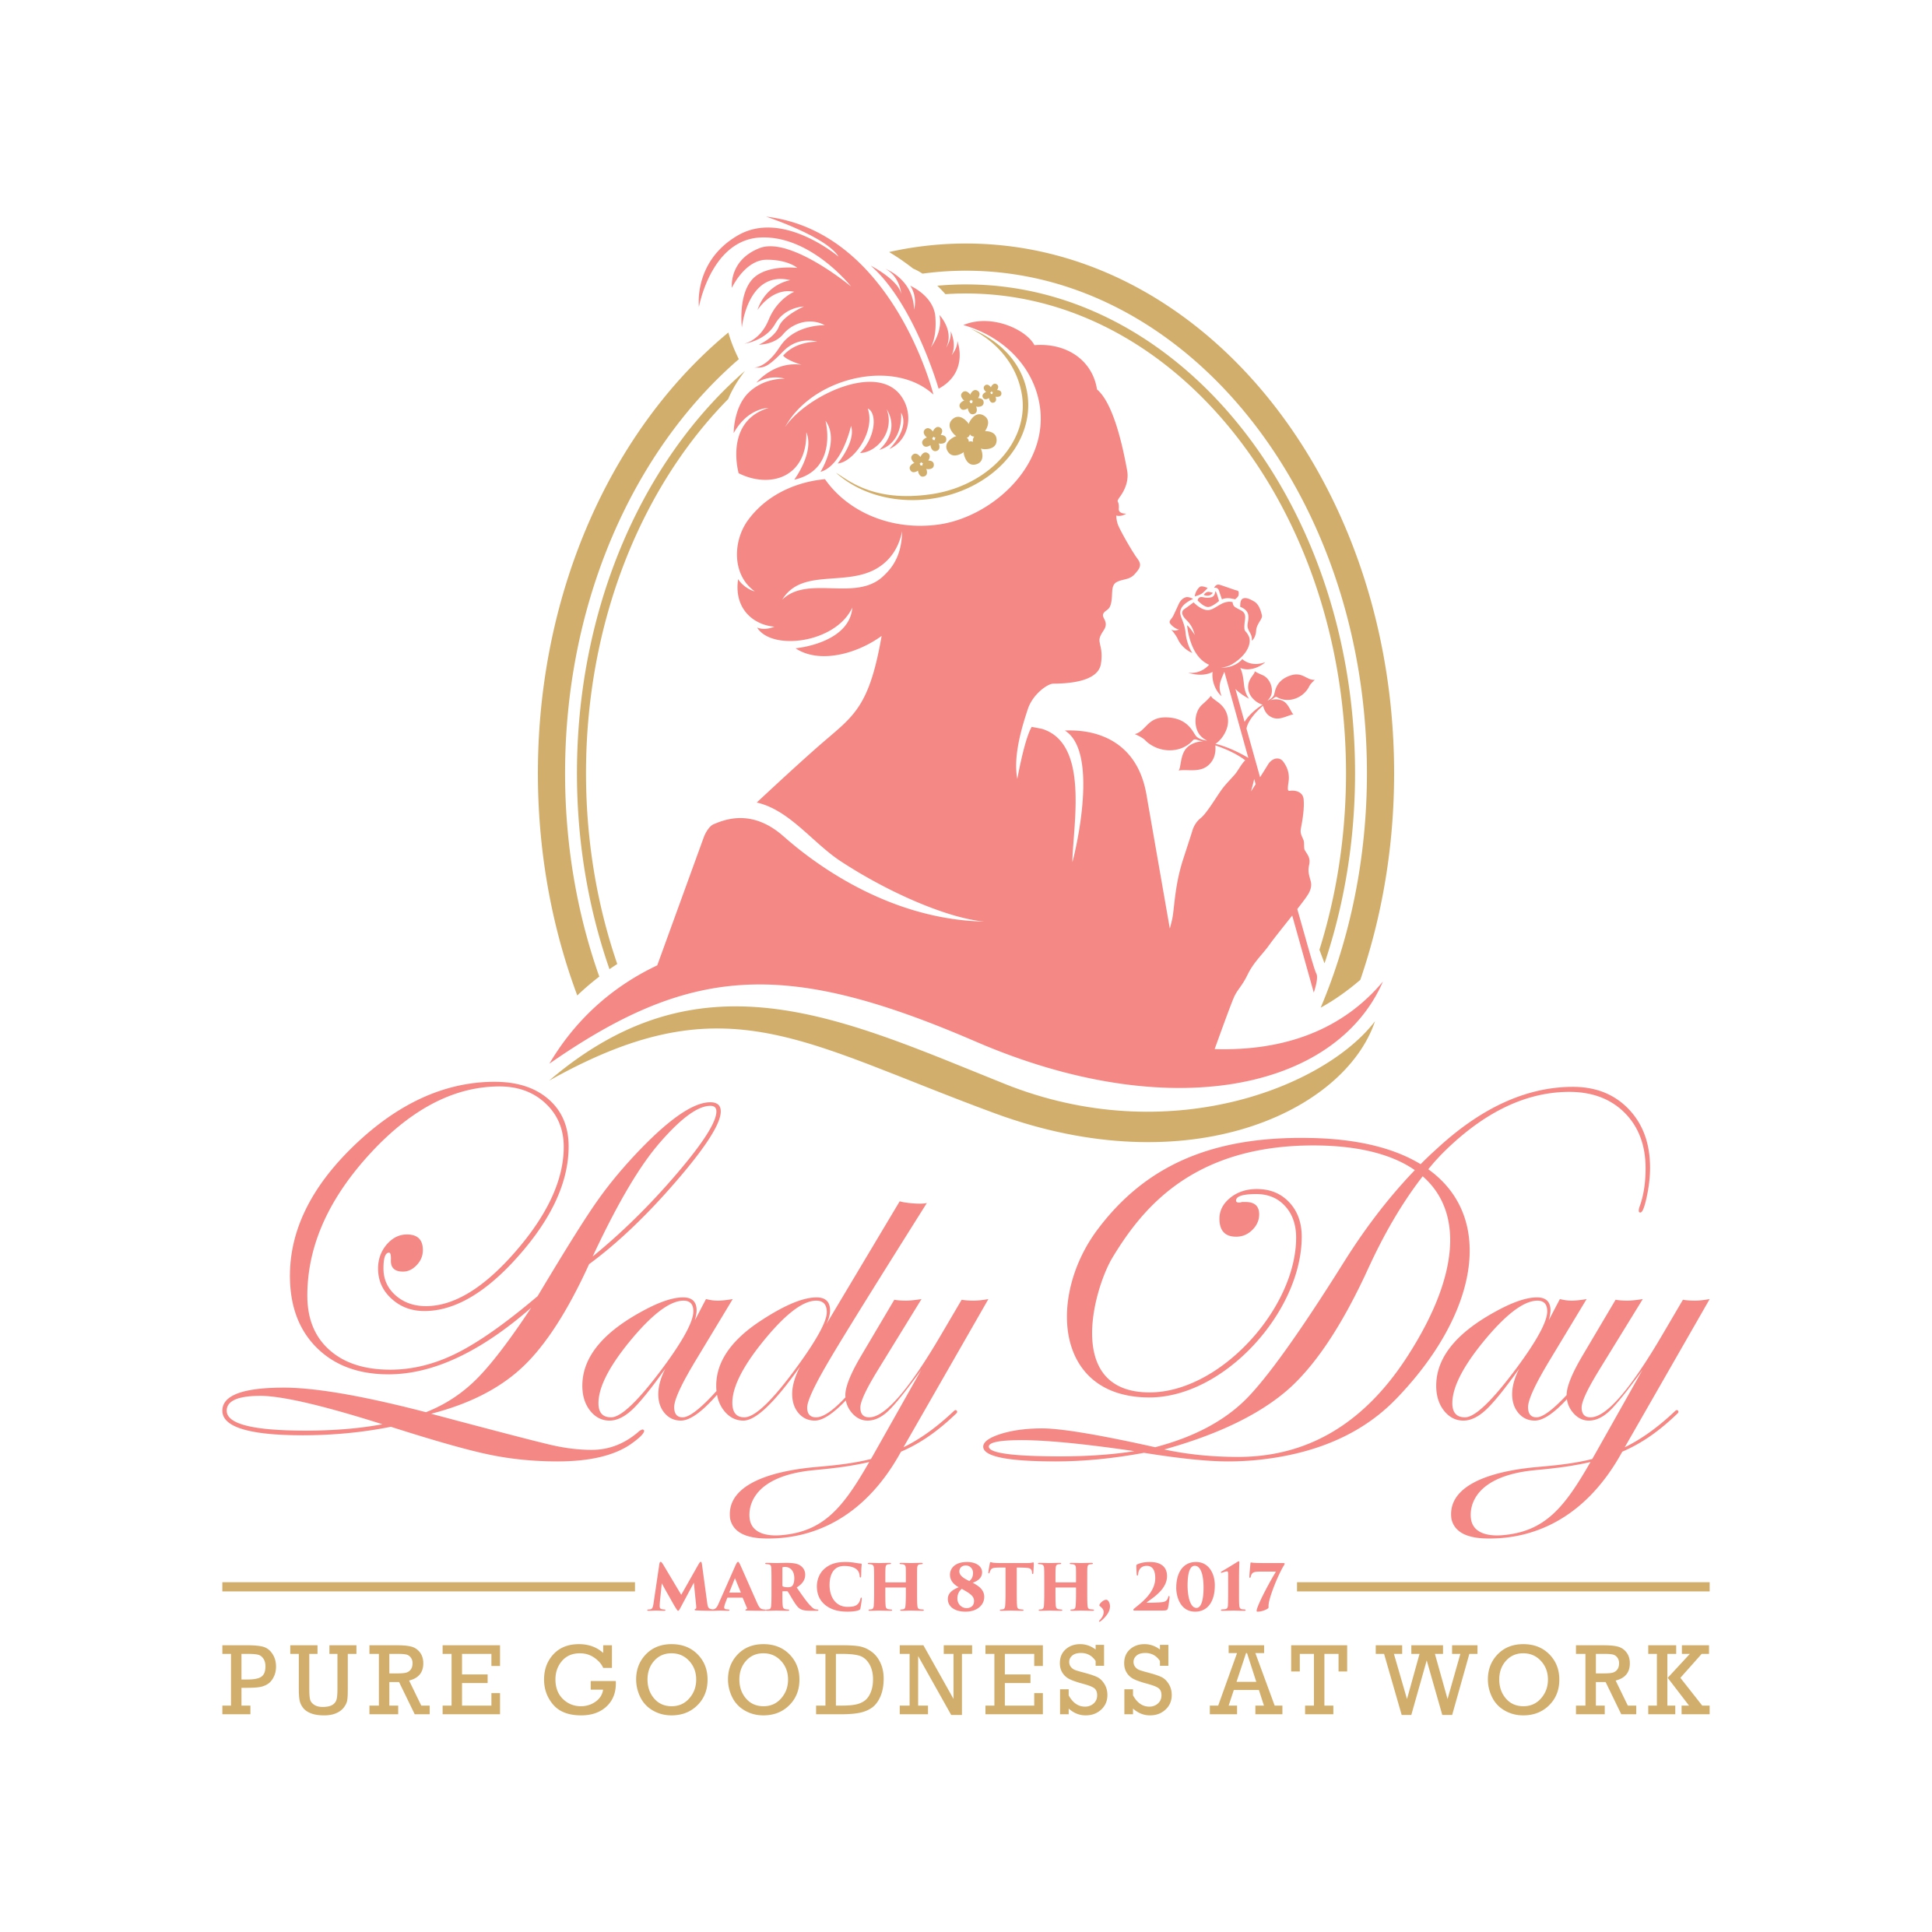 Return to Order Lady Day, March 8th — "Pure Goodness at Work!" 4